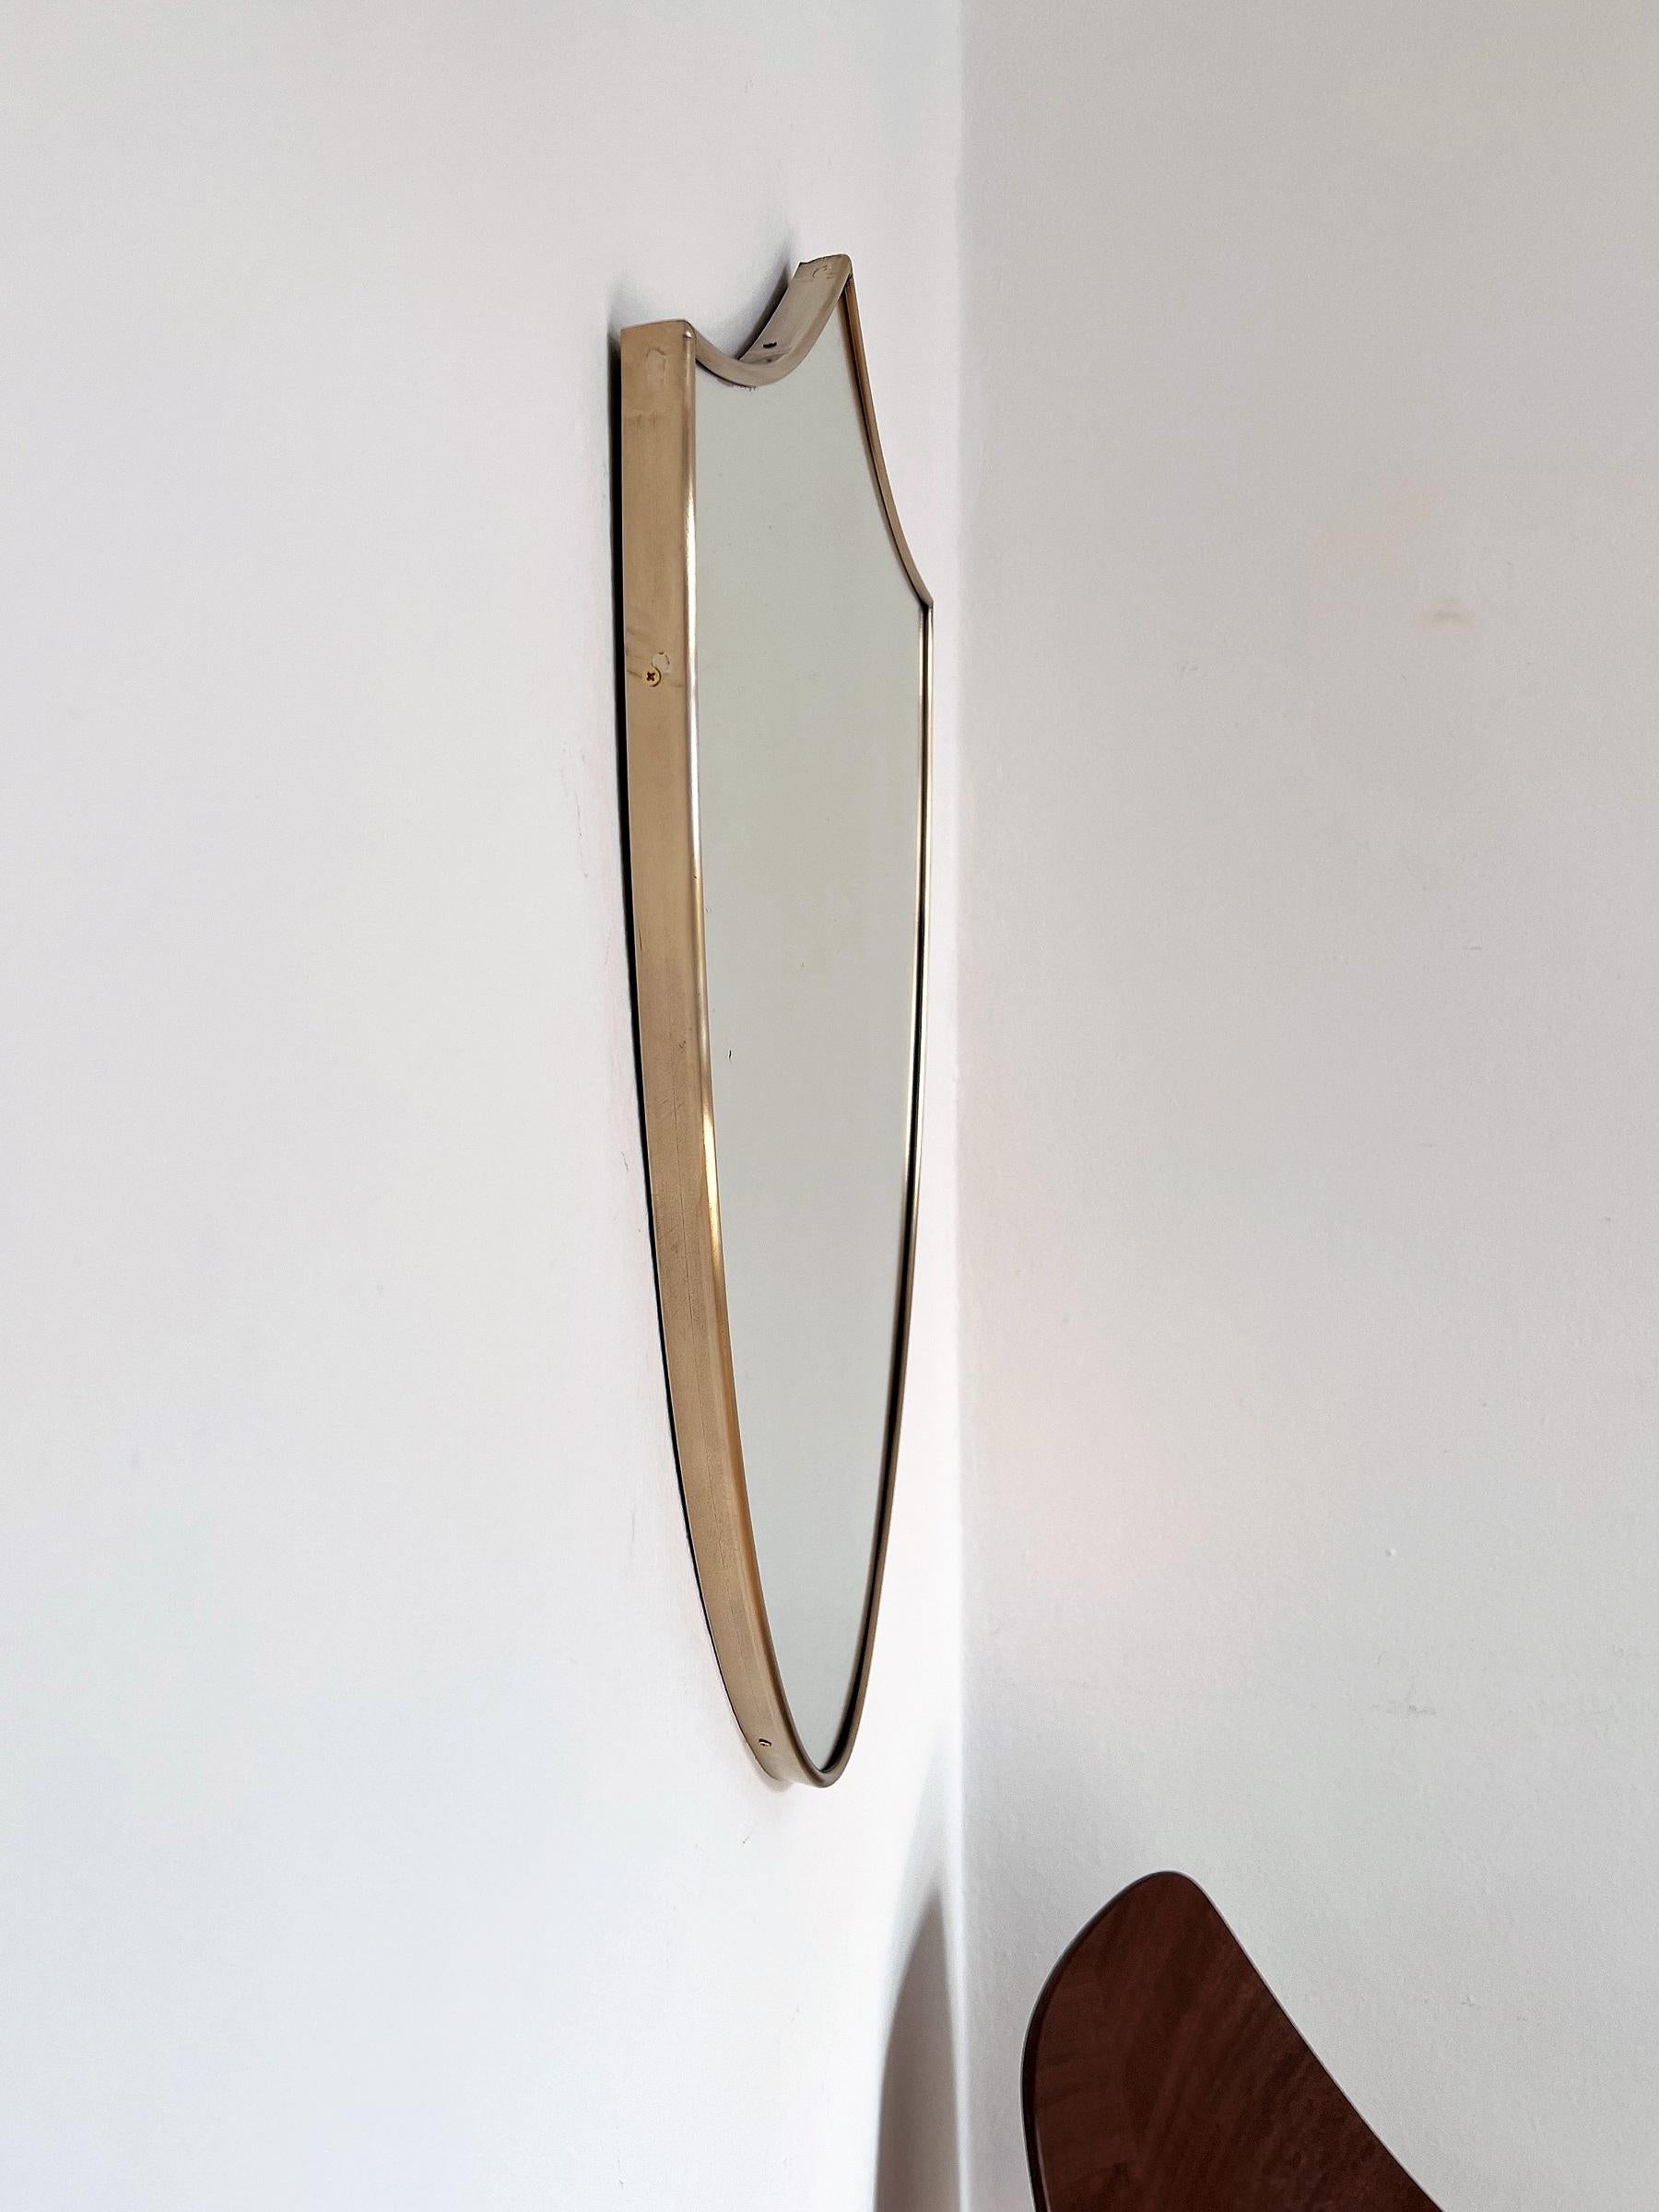 Italian Midcentury Wall Mirror with Brass Frame, 1970s For Sale 4